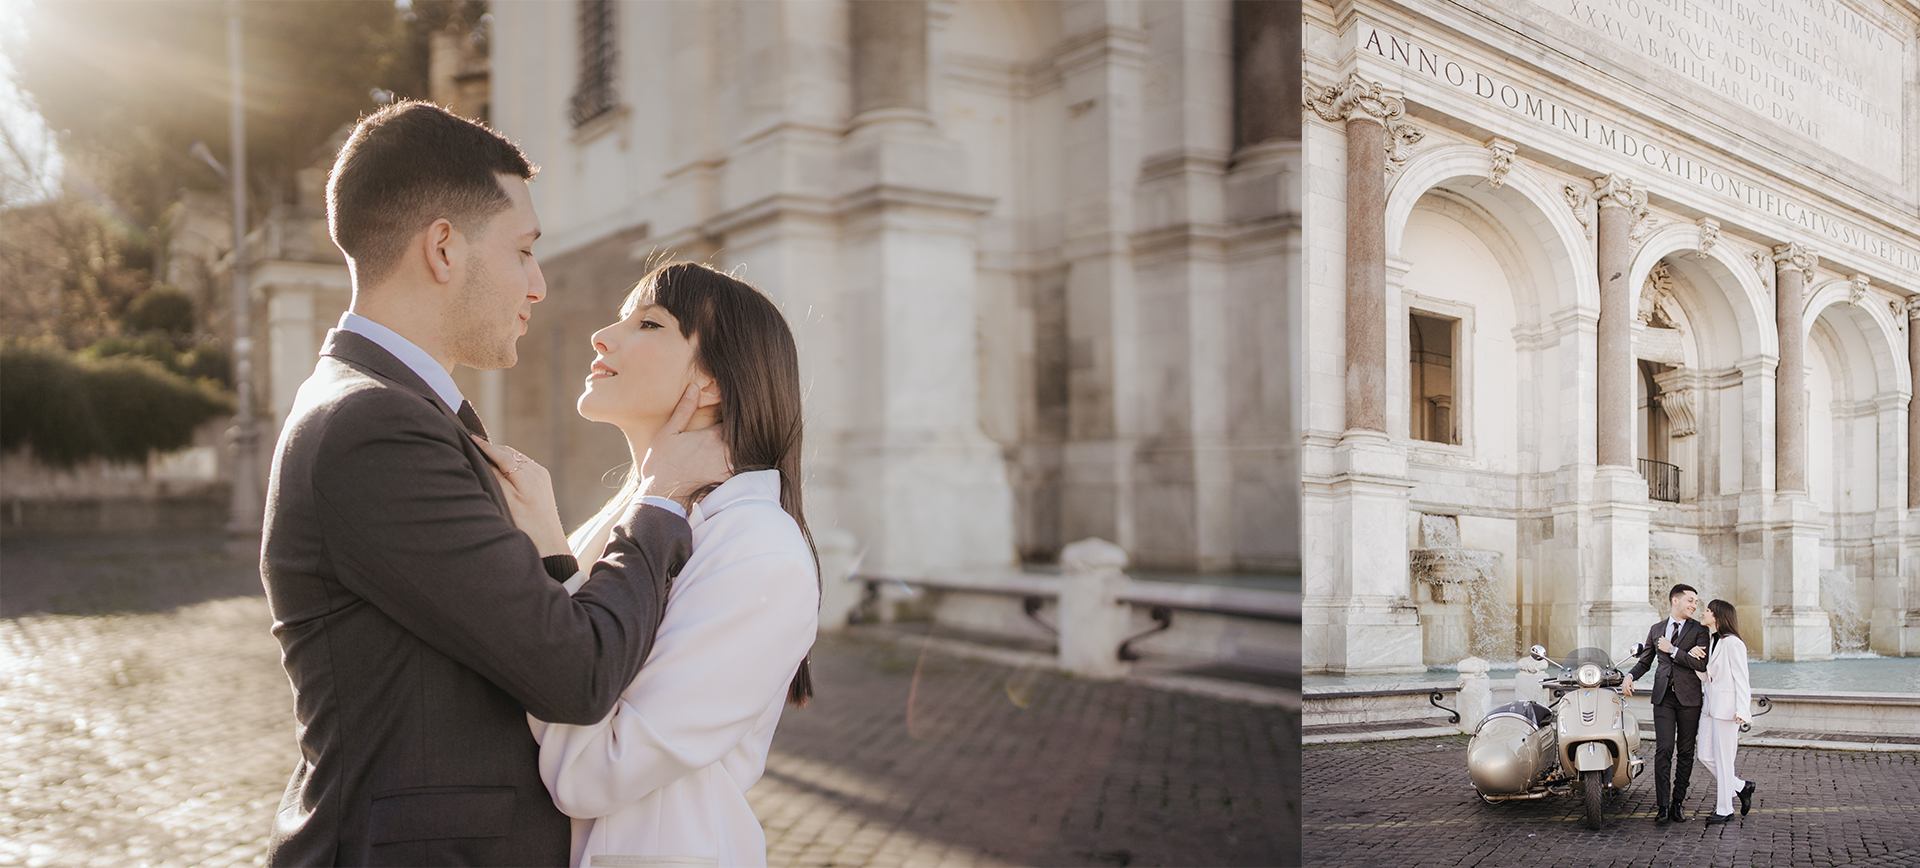 Elopement Package in Italy Vespa City Elopement Package in Rome Italy -2